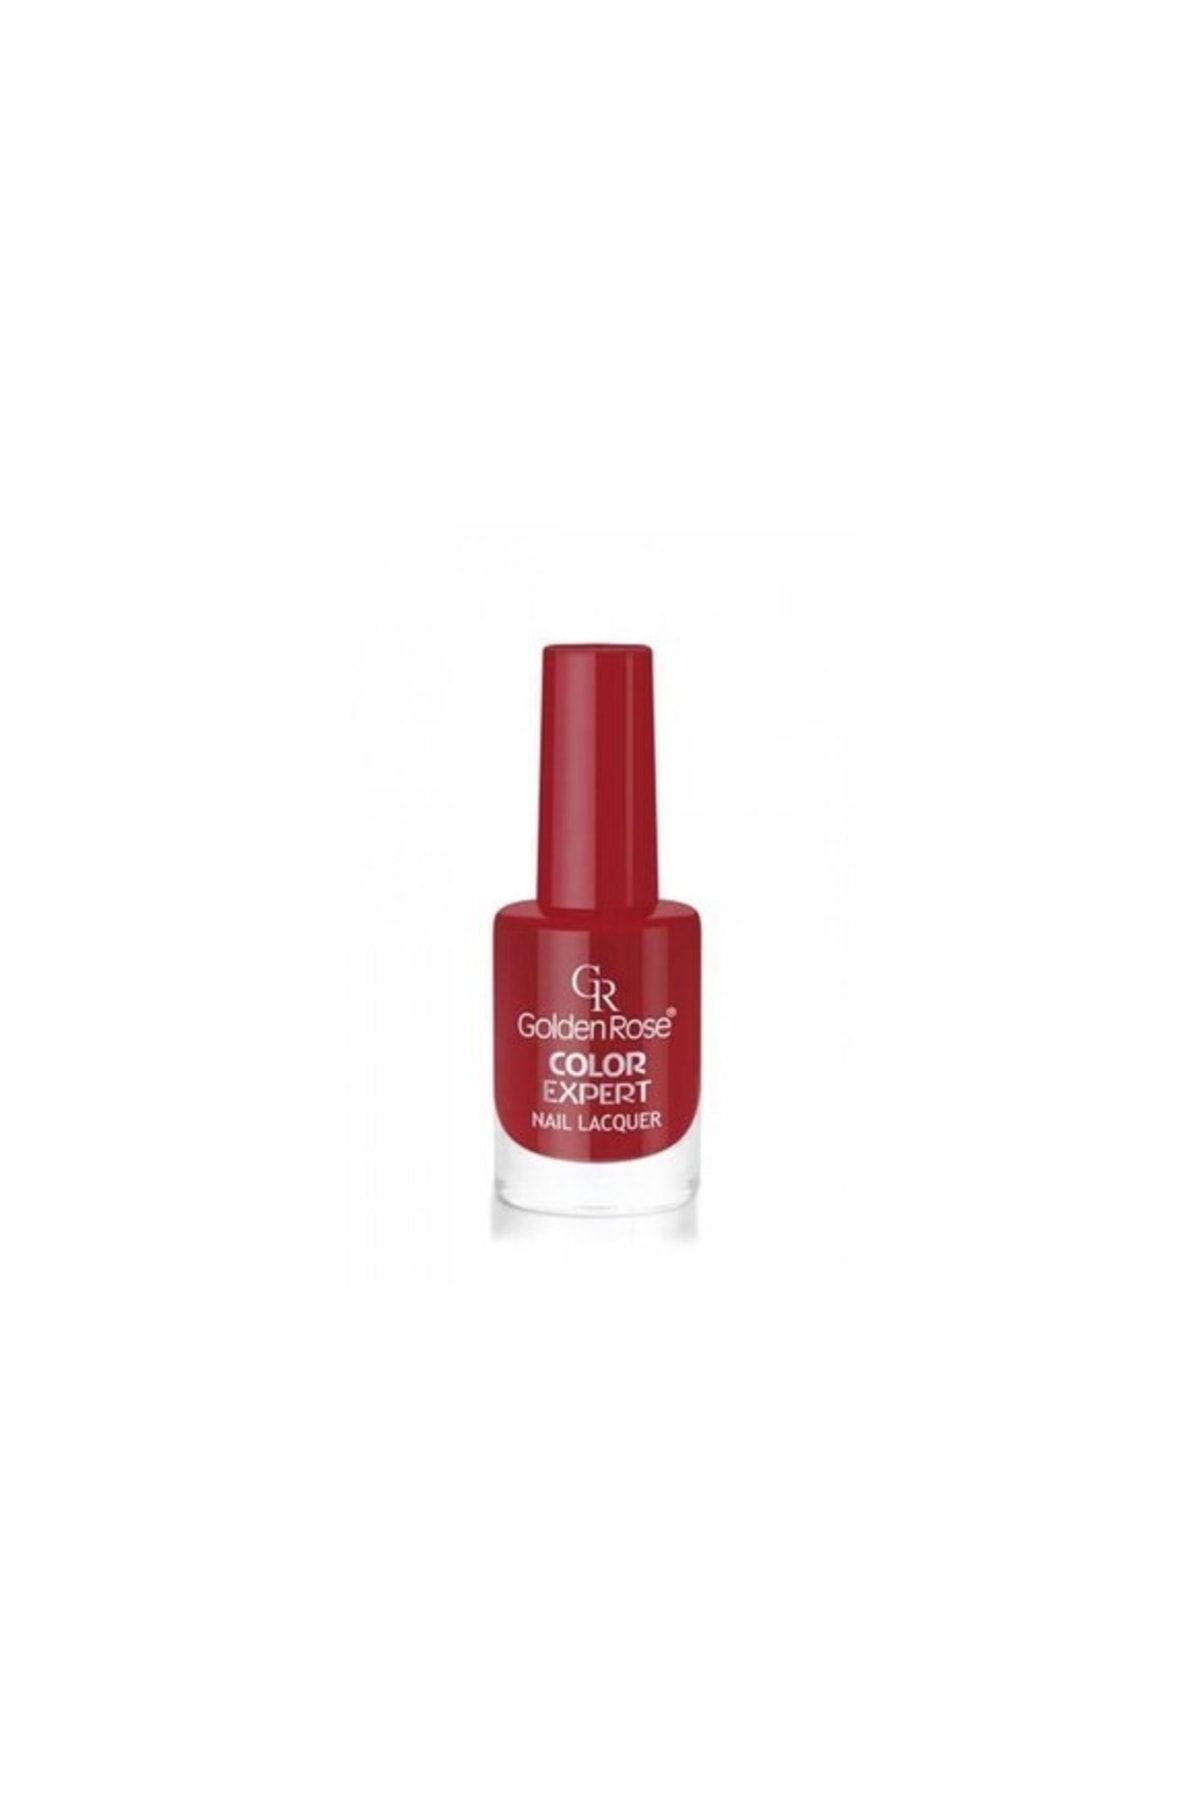 Golden Rose Color Expert Nail Lacquer Oje No:77 Std